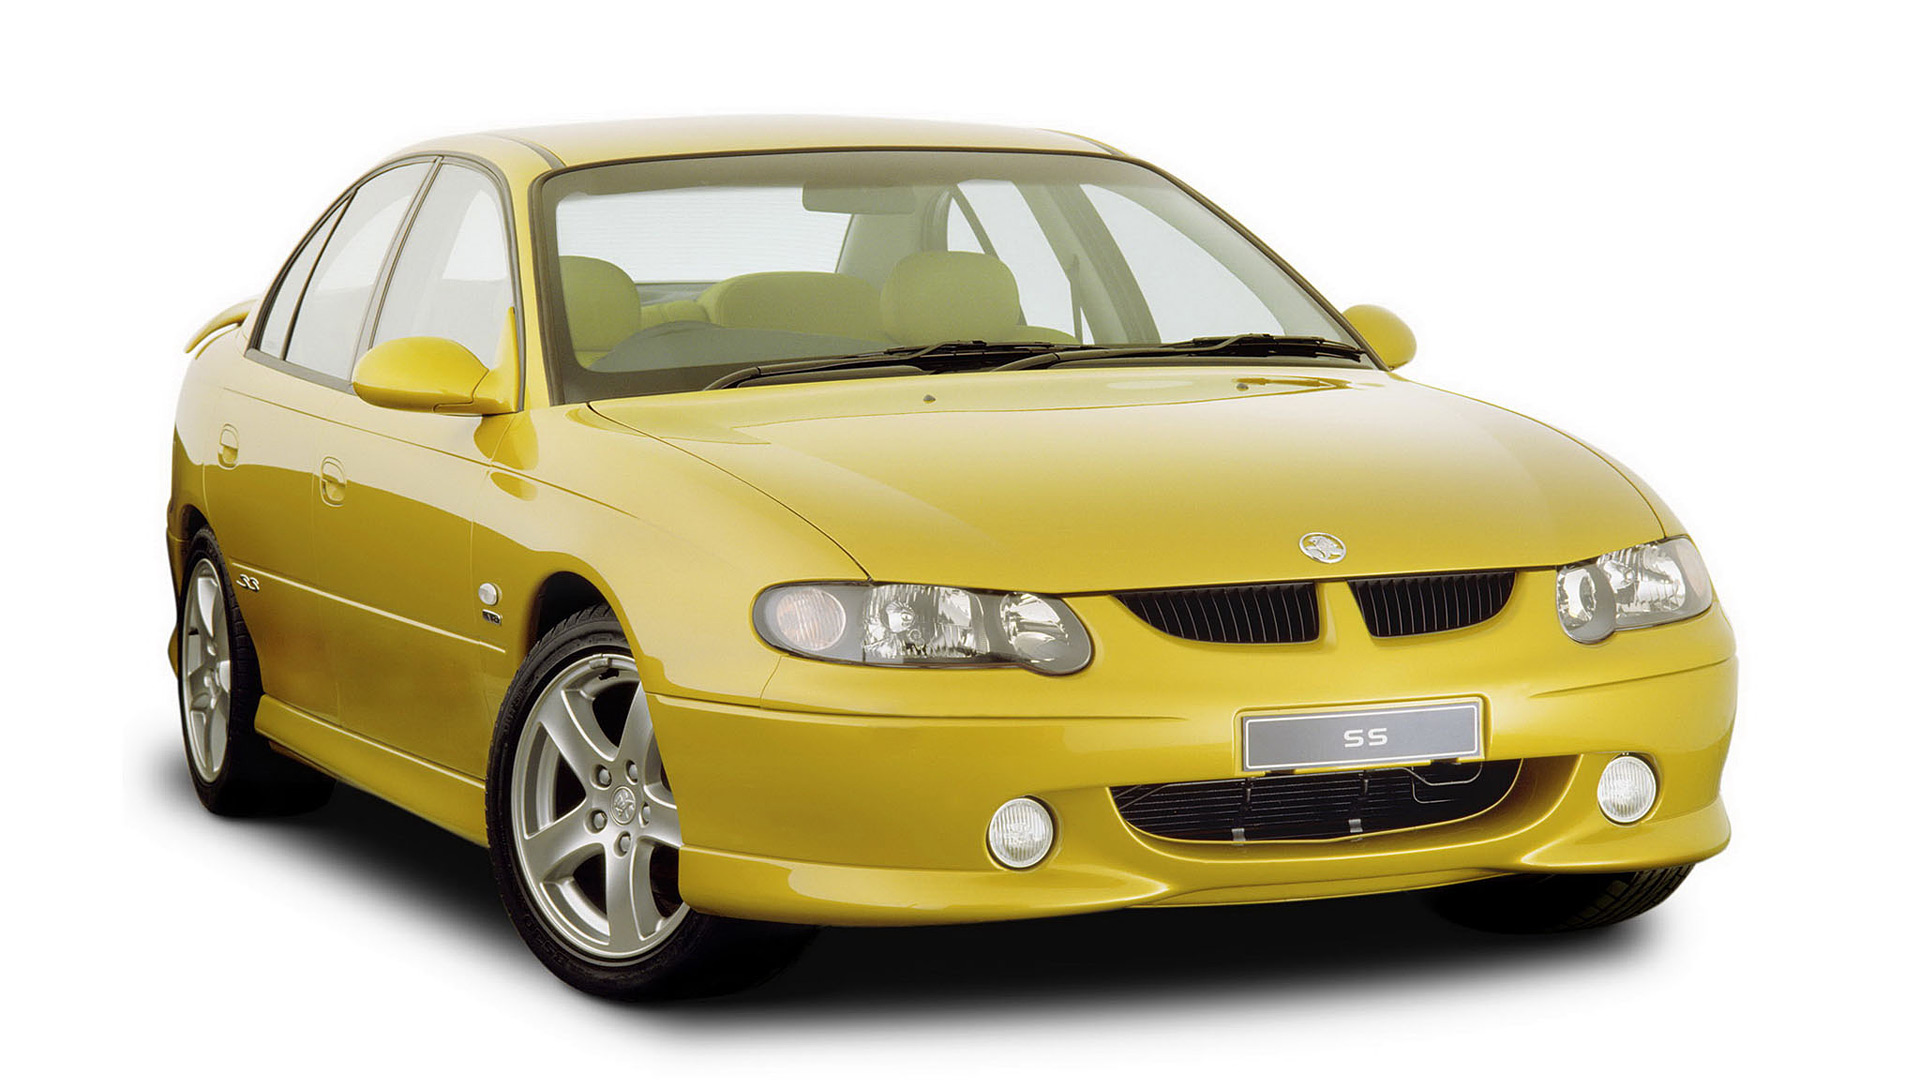  2000 Holden Commodore SS Wallpaper.